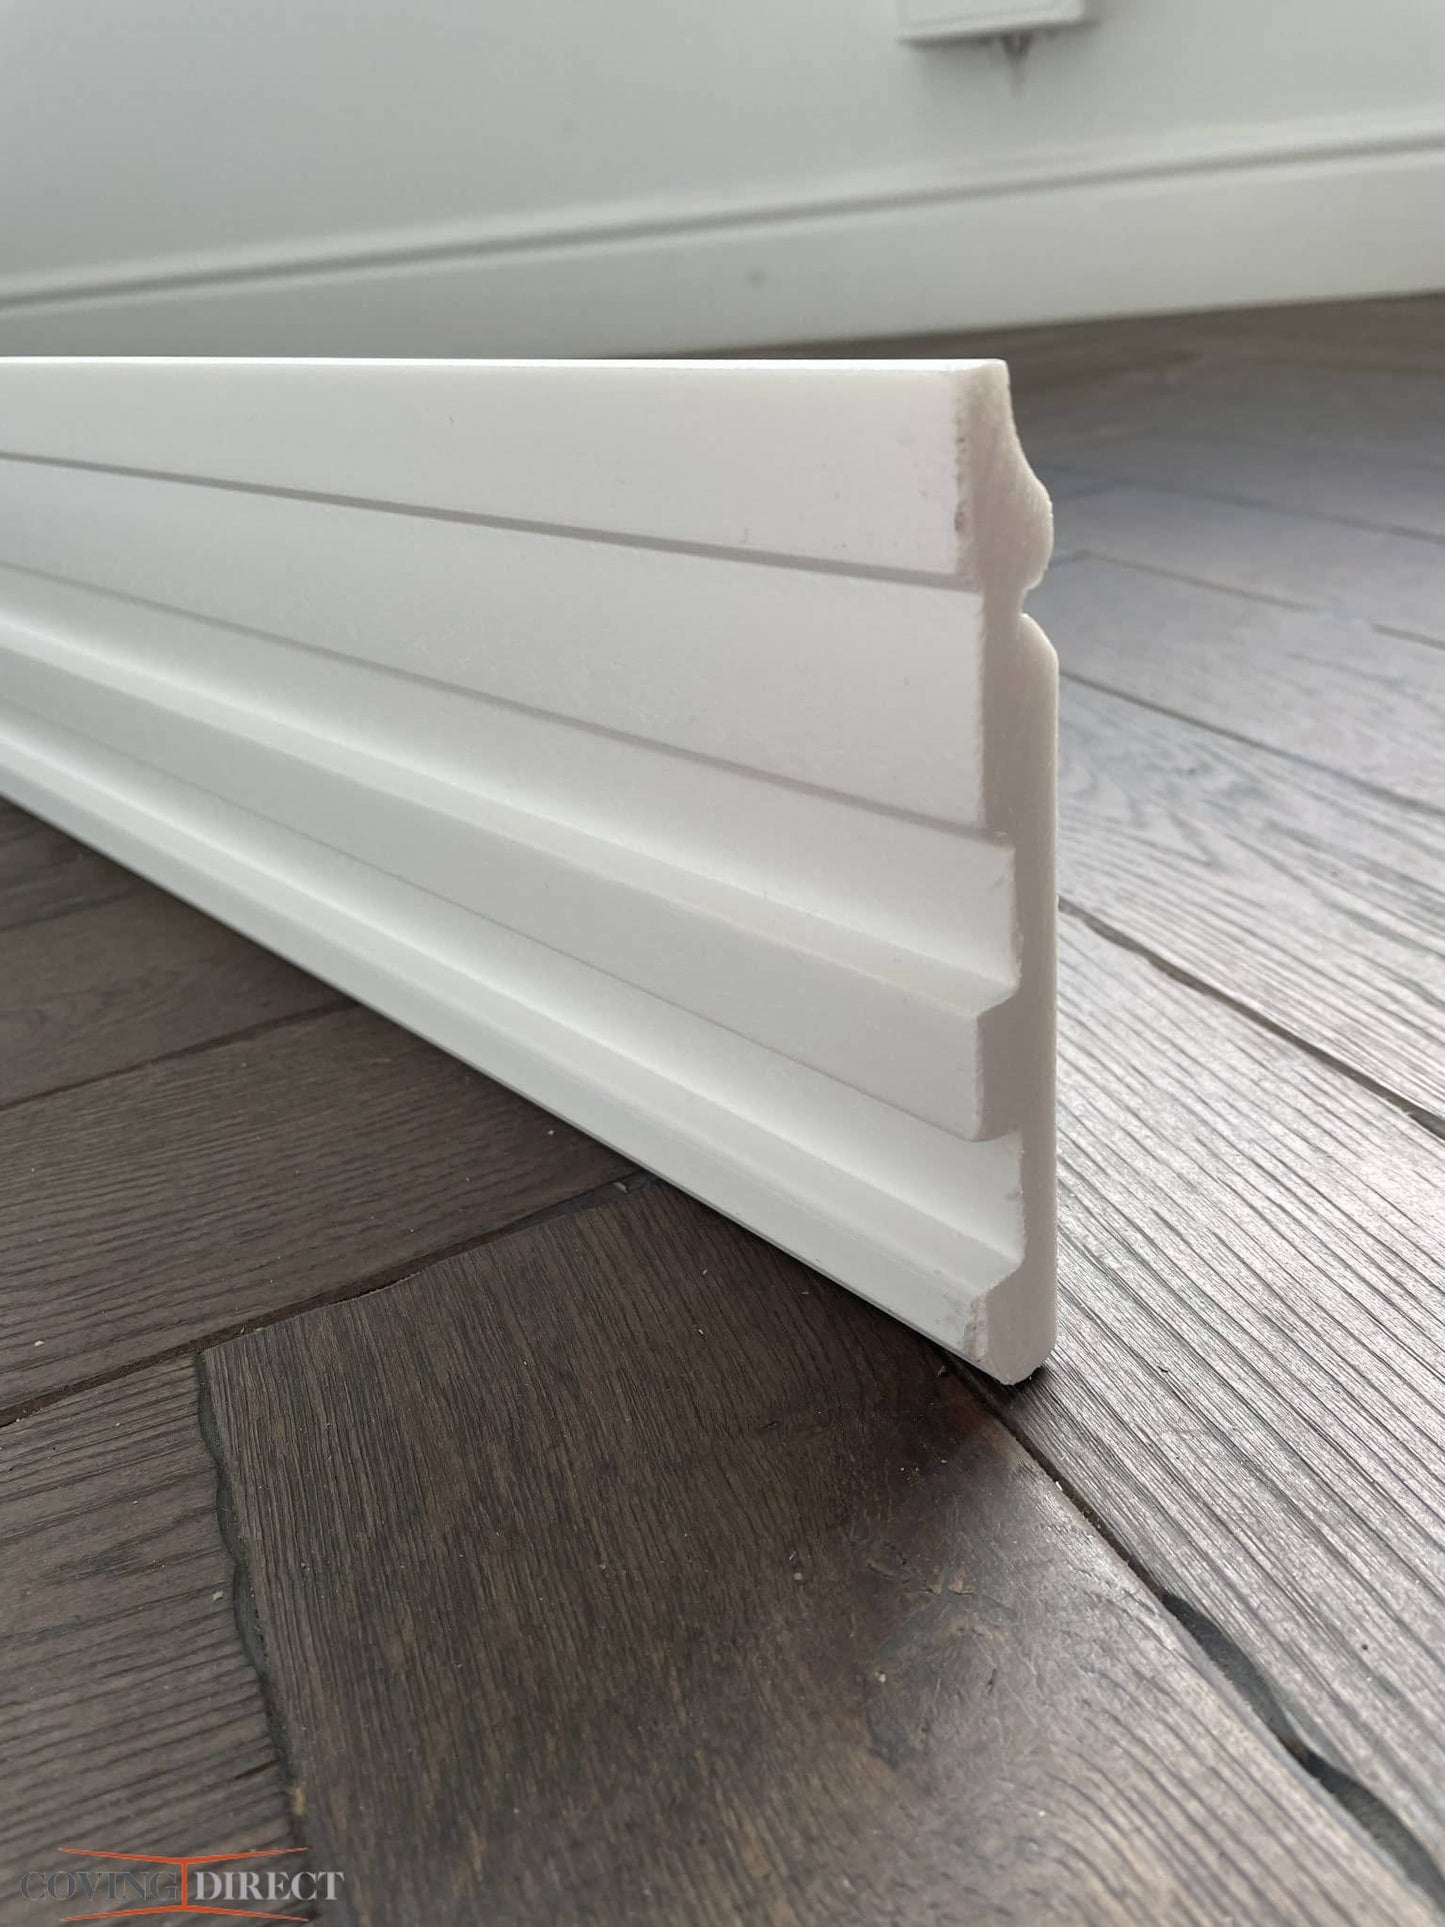 MD360P - Skirting Board on a floor